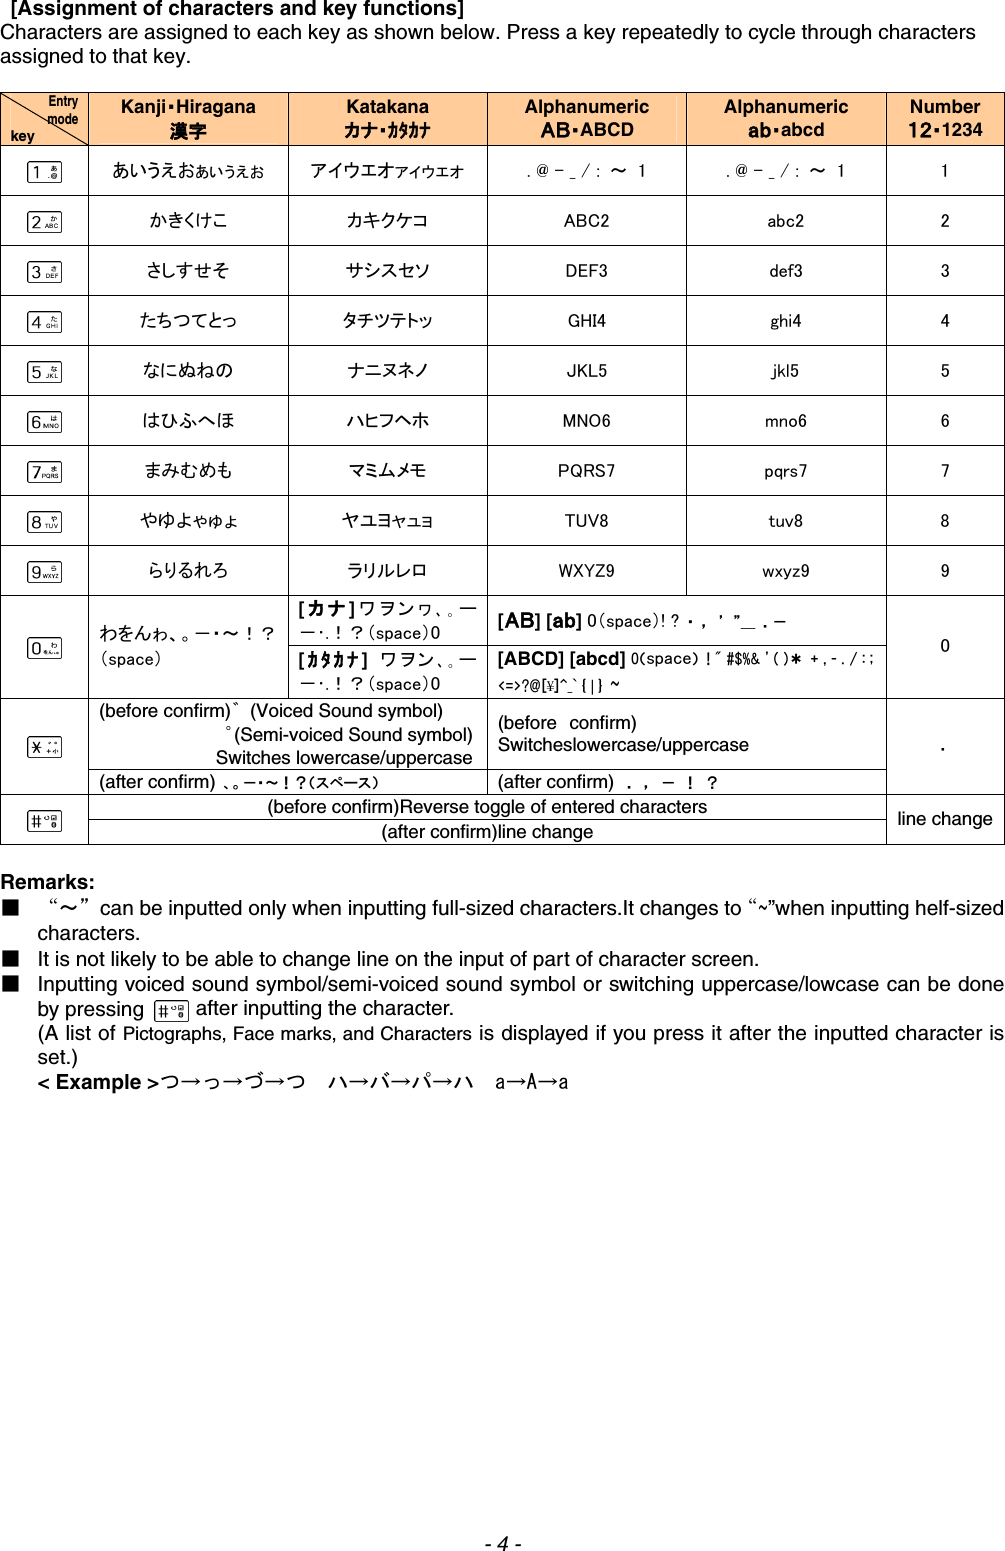   [Assignment of characters and key functions] Characters are assigned to each key as shown below. Press a key repeatedly to cycle through characters assigned to that key.  Entry mode key Kanji・Hiragana 漢字 Katakana カナ・ｶﾀｶﾅ Alphanumeric ＡＢ・ABCD Alphanumeric ａｂ・abcd Number １２・1234  あいうえおぁぃぅぇぉ  アイウエオァィゥェォ  . @ - _ / :  ～  1  . @ - _ / :  ～  1  1  かきくけこ  カキクケコ  ABC2  abc2  2  さしすせそ  サシスセソ  DEF3  def3  3  たちつてとっ  タチツテトッ  GHI4  ghi4  4  なにぬねの  ナニヌネノ  JKL5  jkl5  5  はひふへほ  ハヒフヘホ  MNO6  mno6  6  まみむめも  マミムメモ  PQRS7  pqrs7  7  やゆよゃゅょ  ヤユヨャュョ  TUV8  tuv8  8  らりるれろ  ラリルレロ  WXYZ9  wxyz9  9 [カナ]ワヲンヮ､｡ー－･.！？（space）0  [ＡＢ] [ａｂ] 0（space）! ? ・ ， ’ ”＿ ．－  わをんゎ、。－・～！？（space）  [ｶﾀｶﾅ]  ワヲン､｡ー－･.！？（space）0 [ABCD] [abcd] 0（space）  ! &quot; #$%&amp; &apos; ( )＊ + , - . / : ; &lt;=&gt;?@[¥]^_` { | } ～ 0 (before confirm)゛  (Voiced Sound symbol)           ゜(Semi-voiced Sound symbol)         Switches lowercase/uppercase(before confirm) Switcheslowercase/uppercase  (after confirm)  、。－・～！？（スペース） (after confirm) ．  ，  －  ！  ？ ． (before confirm)Reverse toggle of entered characters  (after confirm)line change    line change Remarks: ■  “～”can be inputted only when inputting full-sized characters.It changes to“～”when inputting helf-sized characters.  ■  It is not likely to be able to change line on the input of part of character screen. ■  Inputting voiced sound symbol/semi-voiced sound symbol or switching uppercase/lowcase can be done by pressing    after inputting the character. (A list of Pictographs, Face marks, and Characters is displayed if you press it after the inputted character is set.) &lt; Example &gt;つ→っ→づ→つ  ハ→バ→パ→ハ  a→A→a    - 4 - 